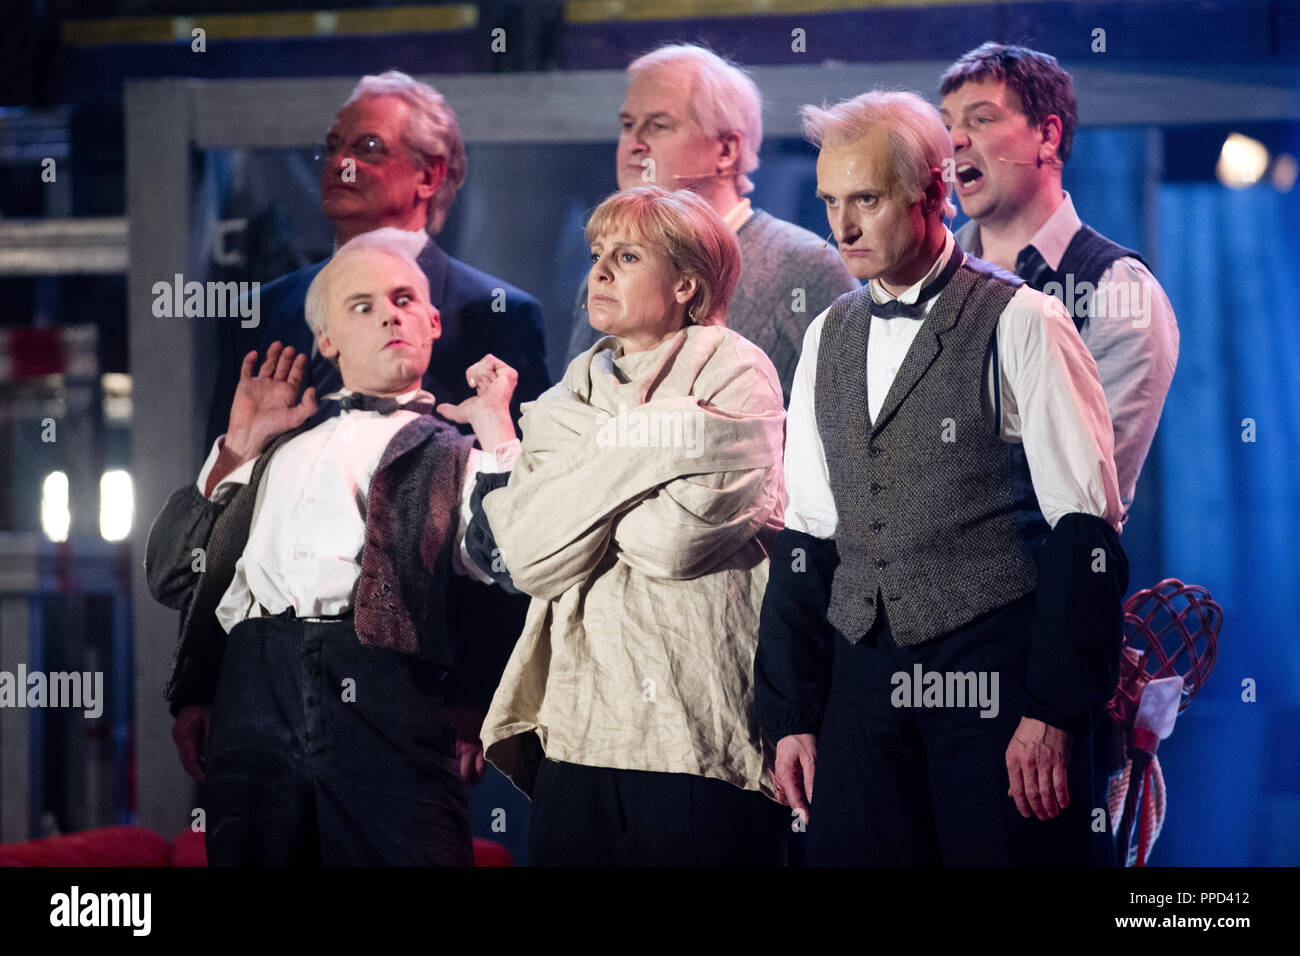 The actors (from left to right) Maxi Scharoth (Mr. Eshofer), Antonia von Romatowski (Angela Merkel) and Paul Kaiser (Oberhirnrat Ueberichhofer) and (behind from left to right) Michael Vogtmann (Joachim Herrmann), Christoph Zrenner (Horst Seehofer) and Stefan Zinner (Markus Soeder ) during the musical comedy at the Starkbierprobe (strong beer tapping) at the Munich Nockherberg. Stock Photo